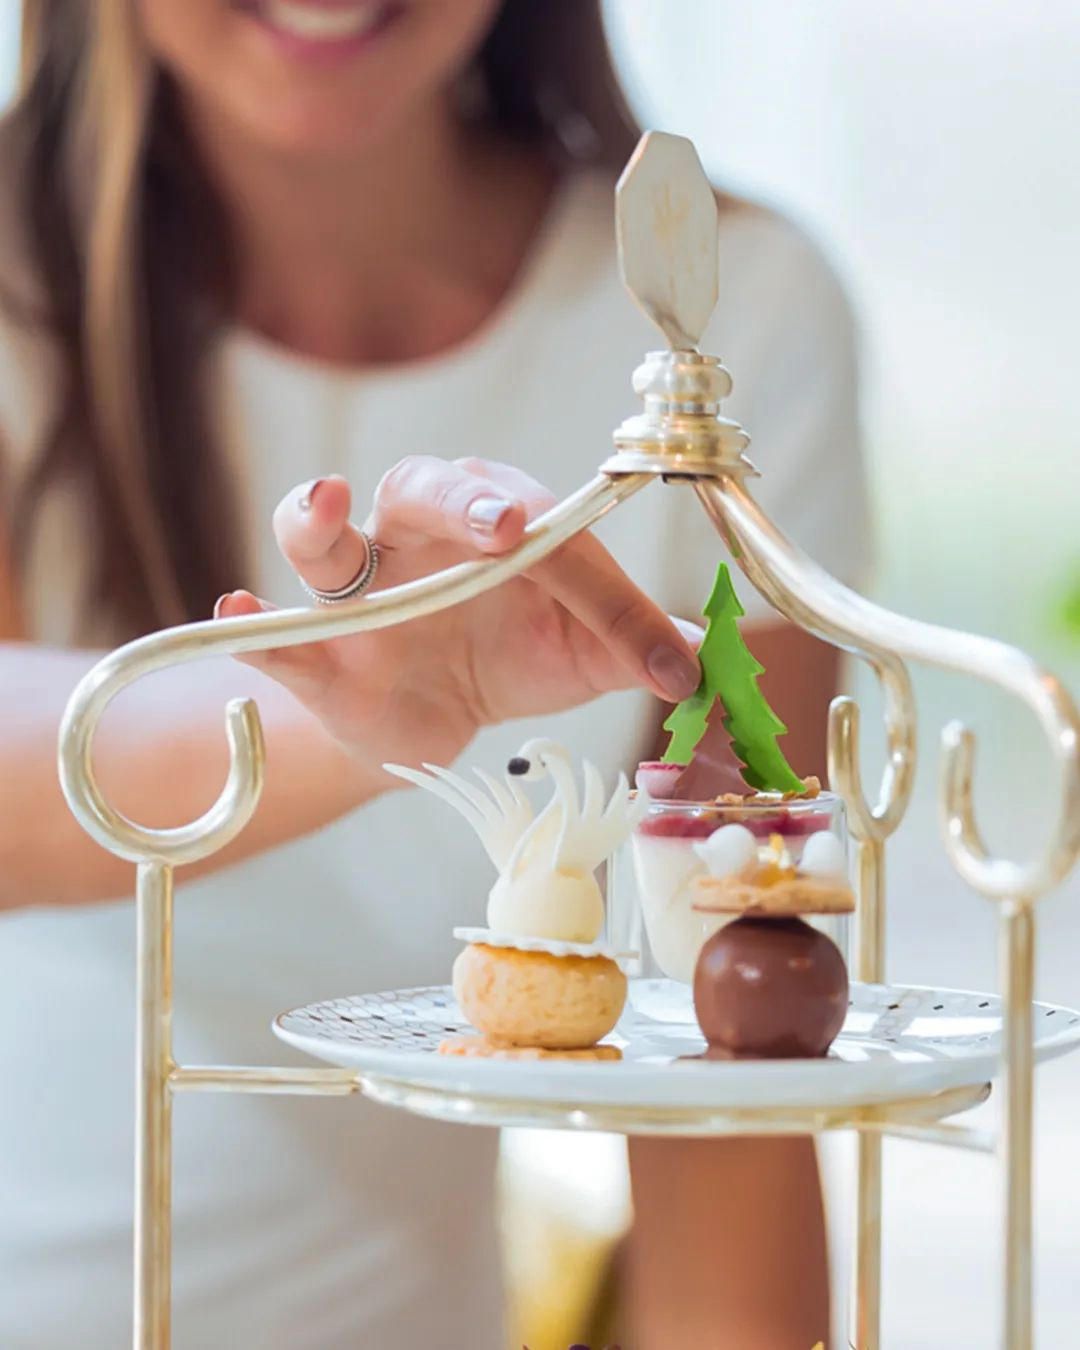 image  1 Address Sky View - This festive season, indulge in scrumptious delights over Afternoon Tea